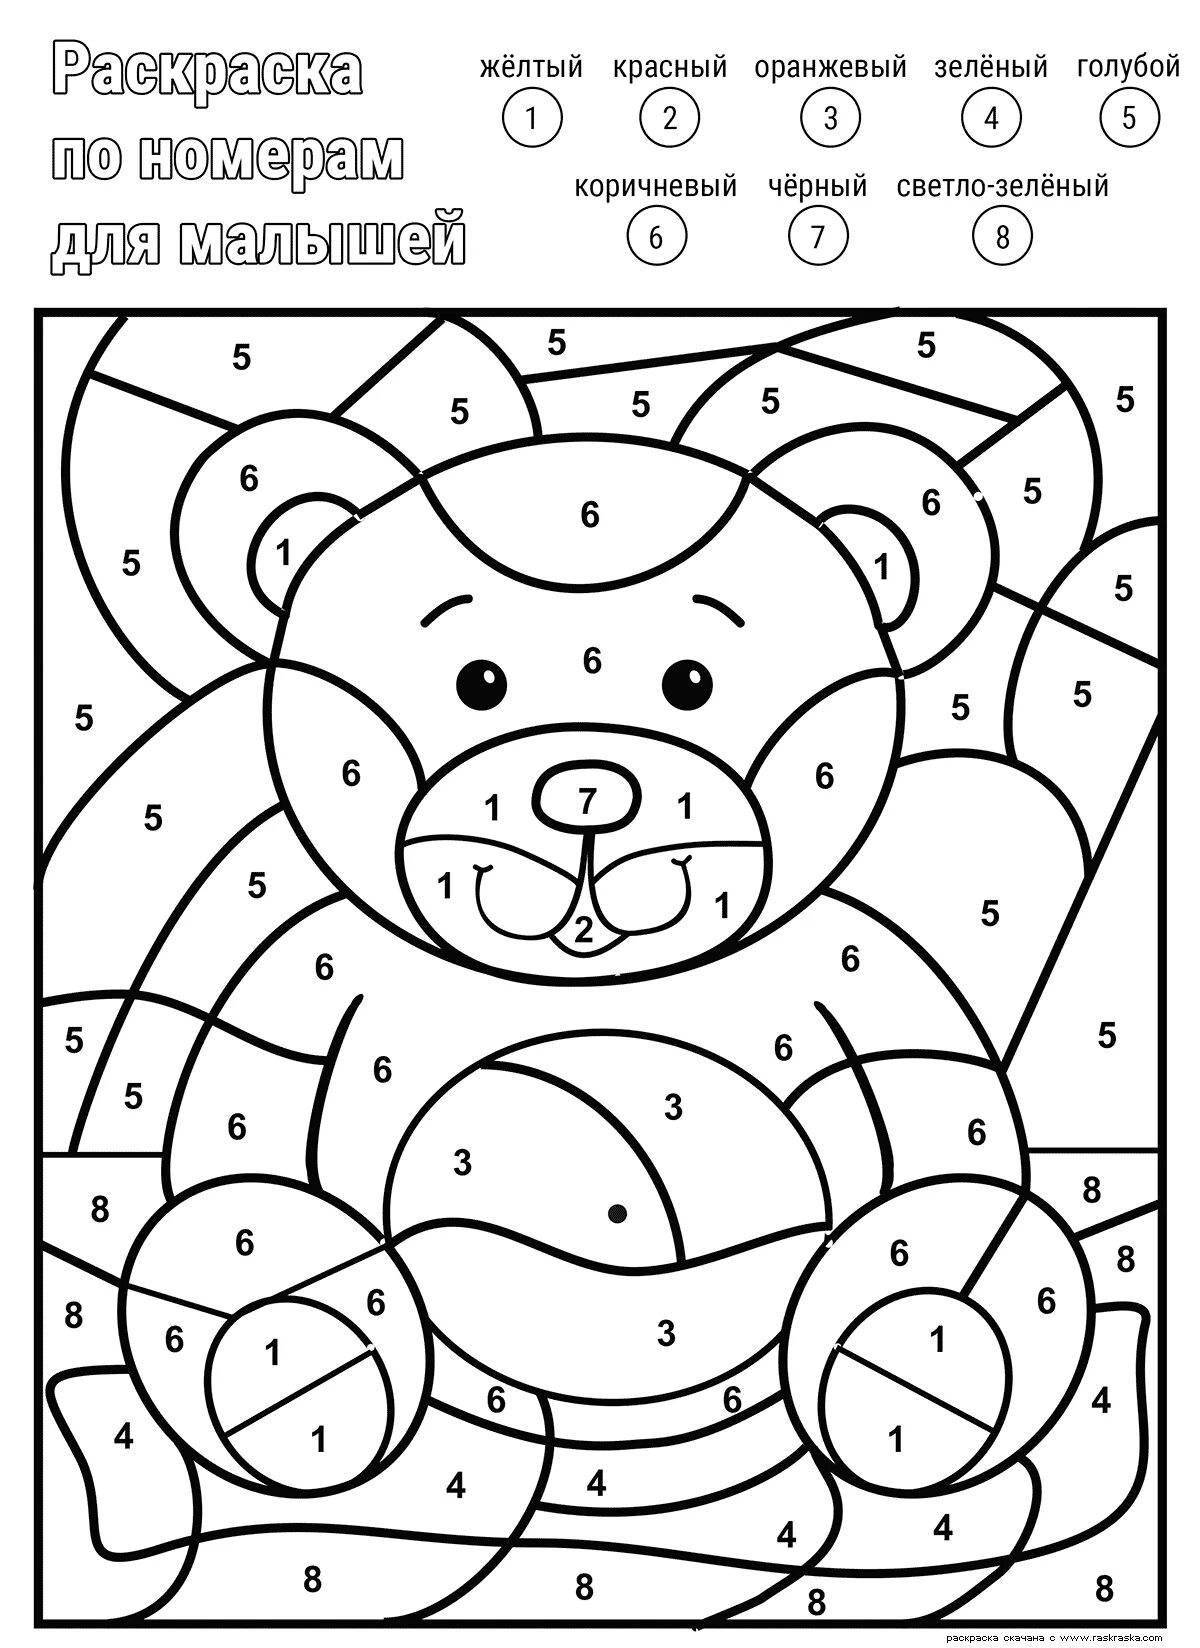 Entertaining coloring by numbers grade 1